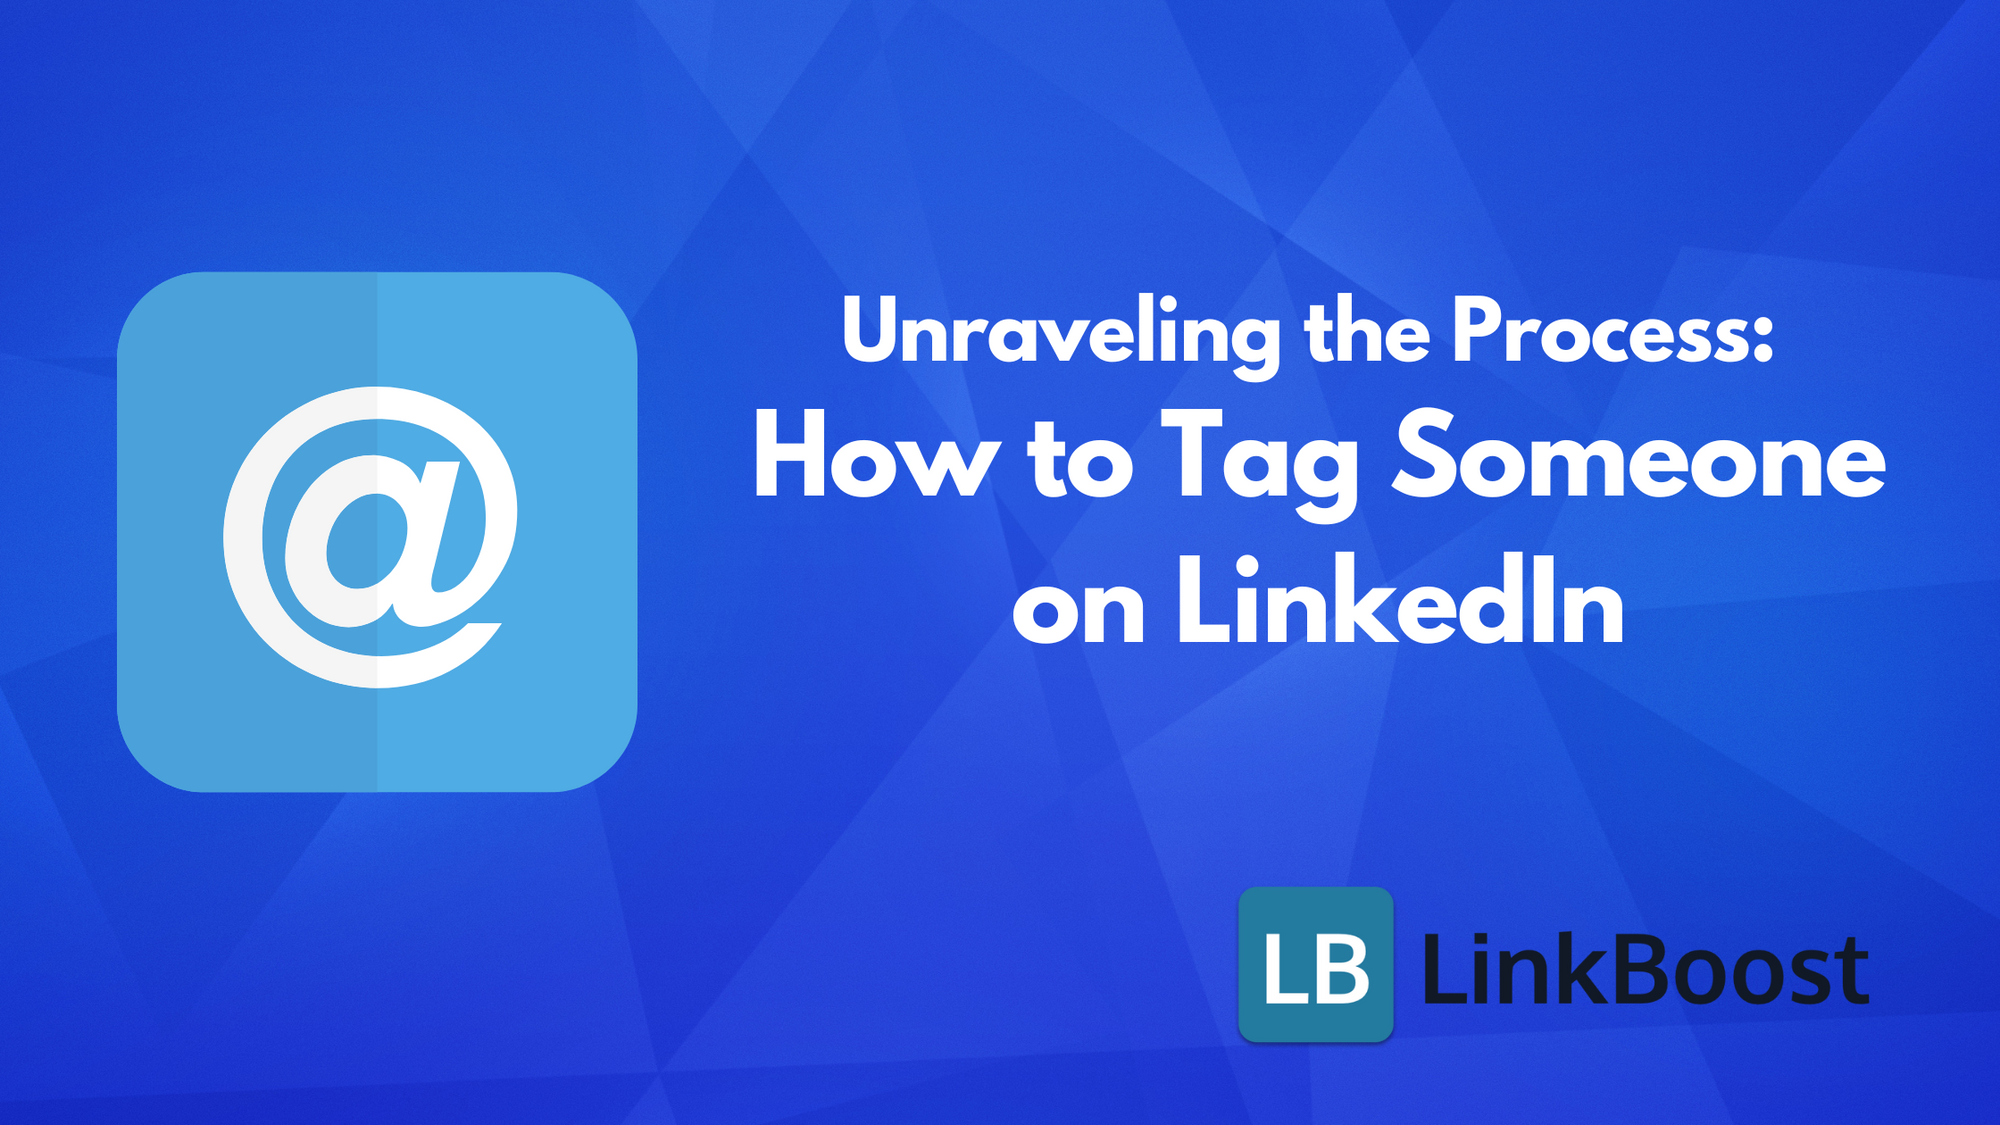 Unraveling the Process: How to Tag Someone on LinkedIn